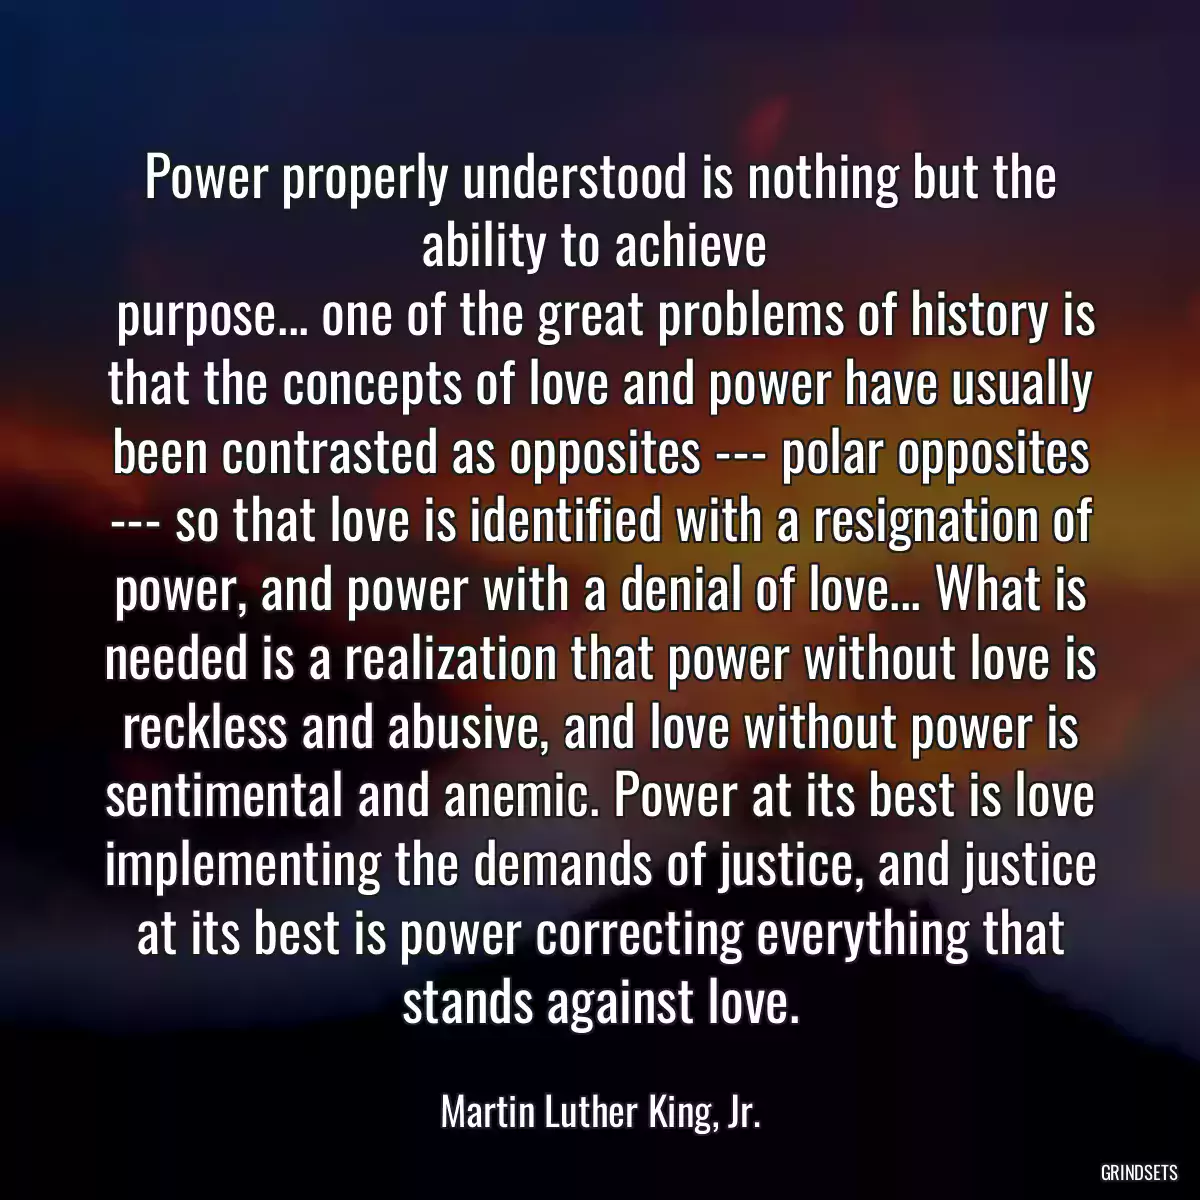 Power properly understood is nothing but the ability to achieve 
 purpose... one of the great problems of history is that the concepts of love and power have usually been contrasted as opposites --- polar opposites --- so that love is identified with a resignation of power, and power with a denial of love... What is needed is a realization that power without love is reckless and abusive, and love without power is sentimental and anemic. Power at its best is love implementing the demands of justice, and justice at its best is power correcting everything that stands against love.